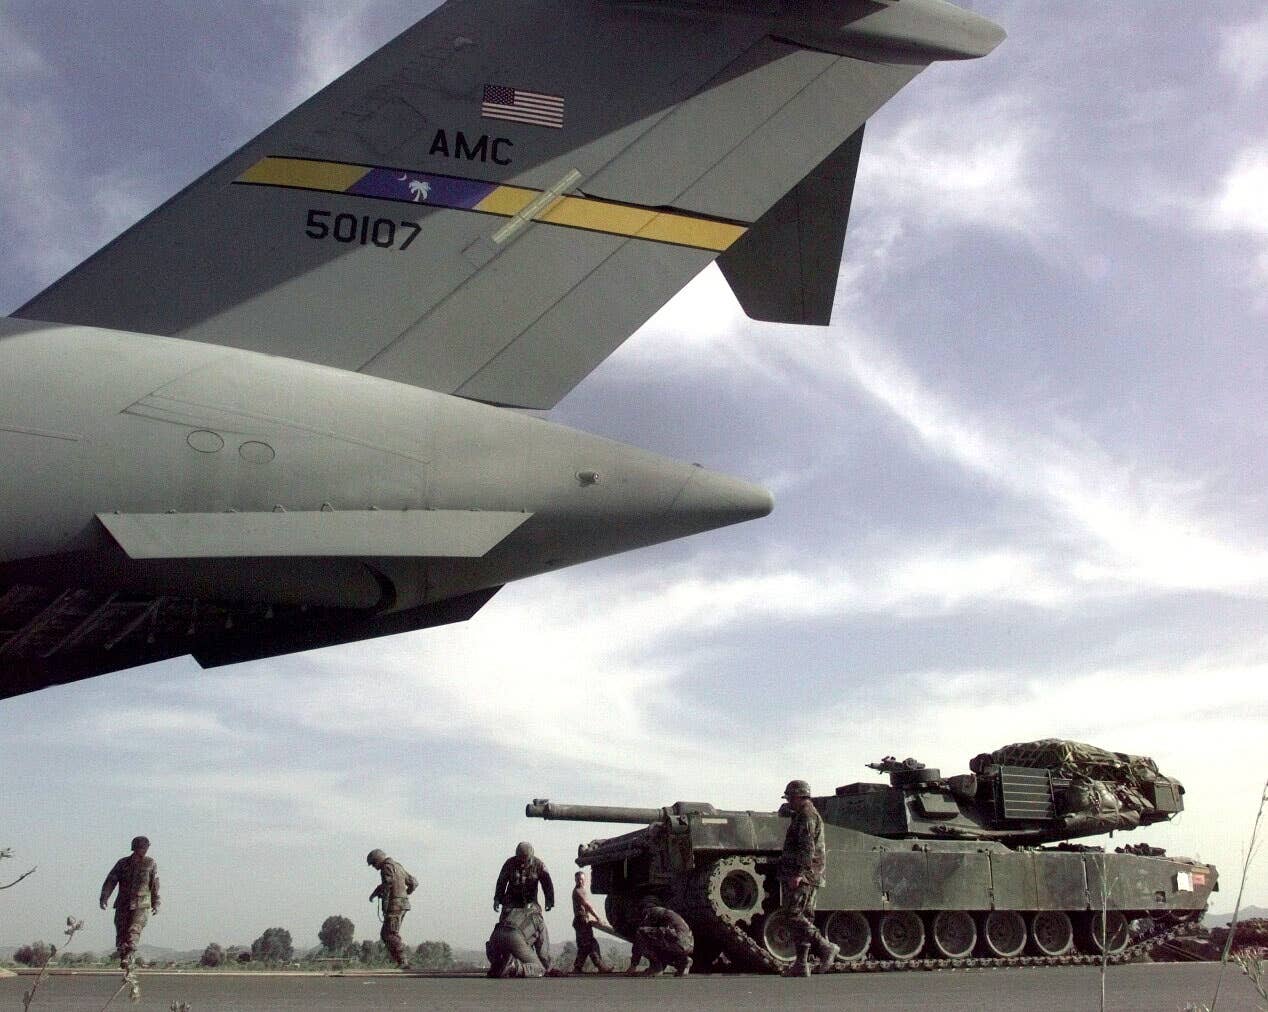 Only one M1 Abrams tank can fit on a C-17 Globemaster III cargo jet. (Photo By DoD/Getty Images)